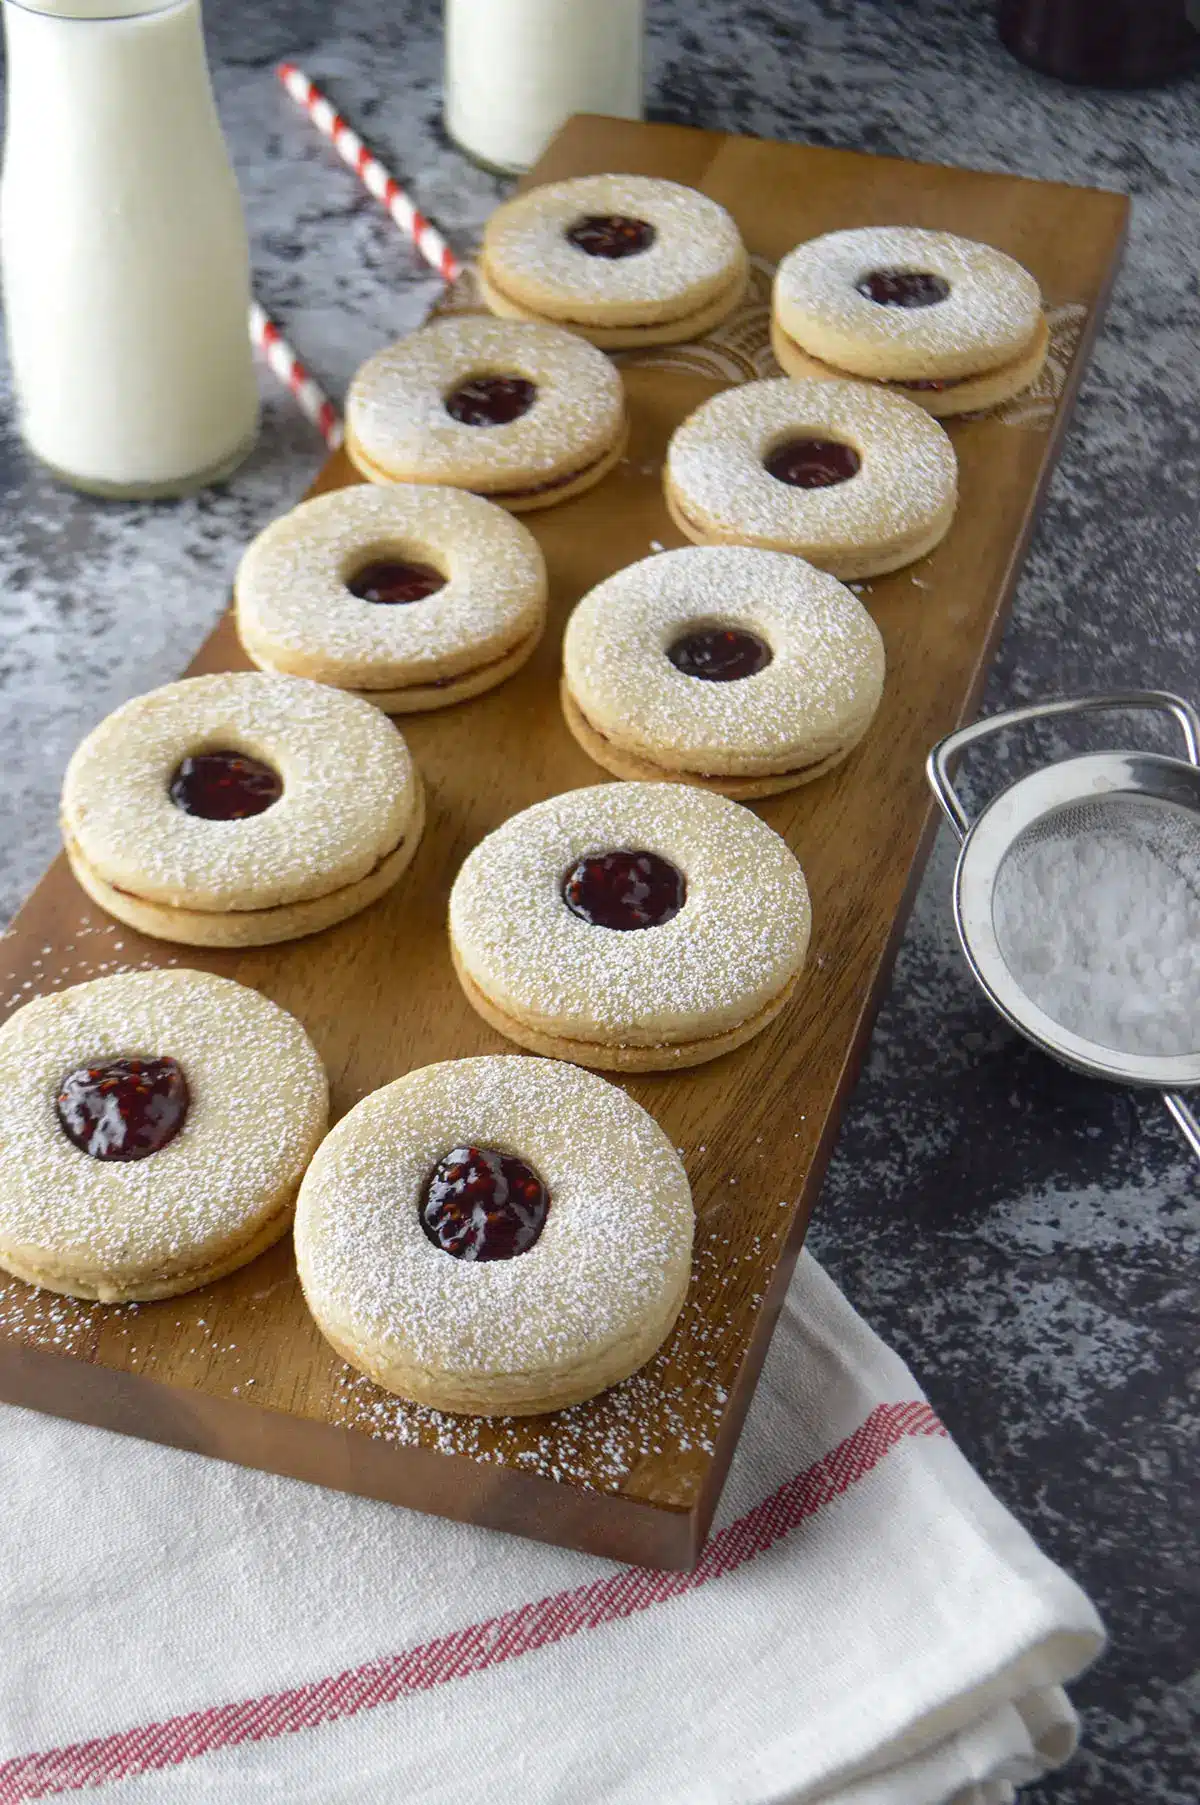 Linzer cookies filled with raspberry jam and placed on a wooden board.